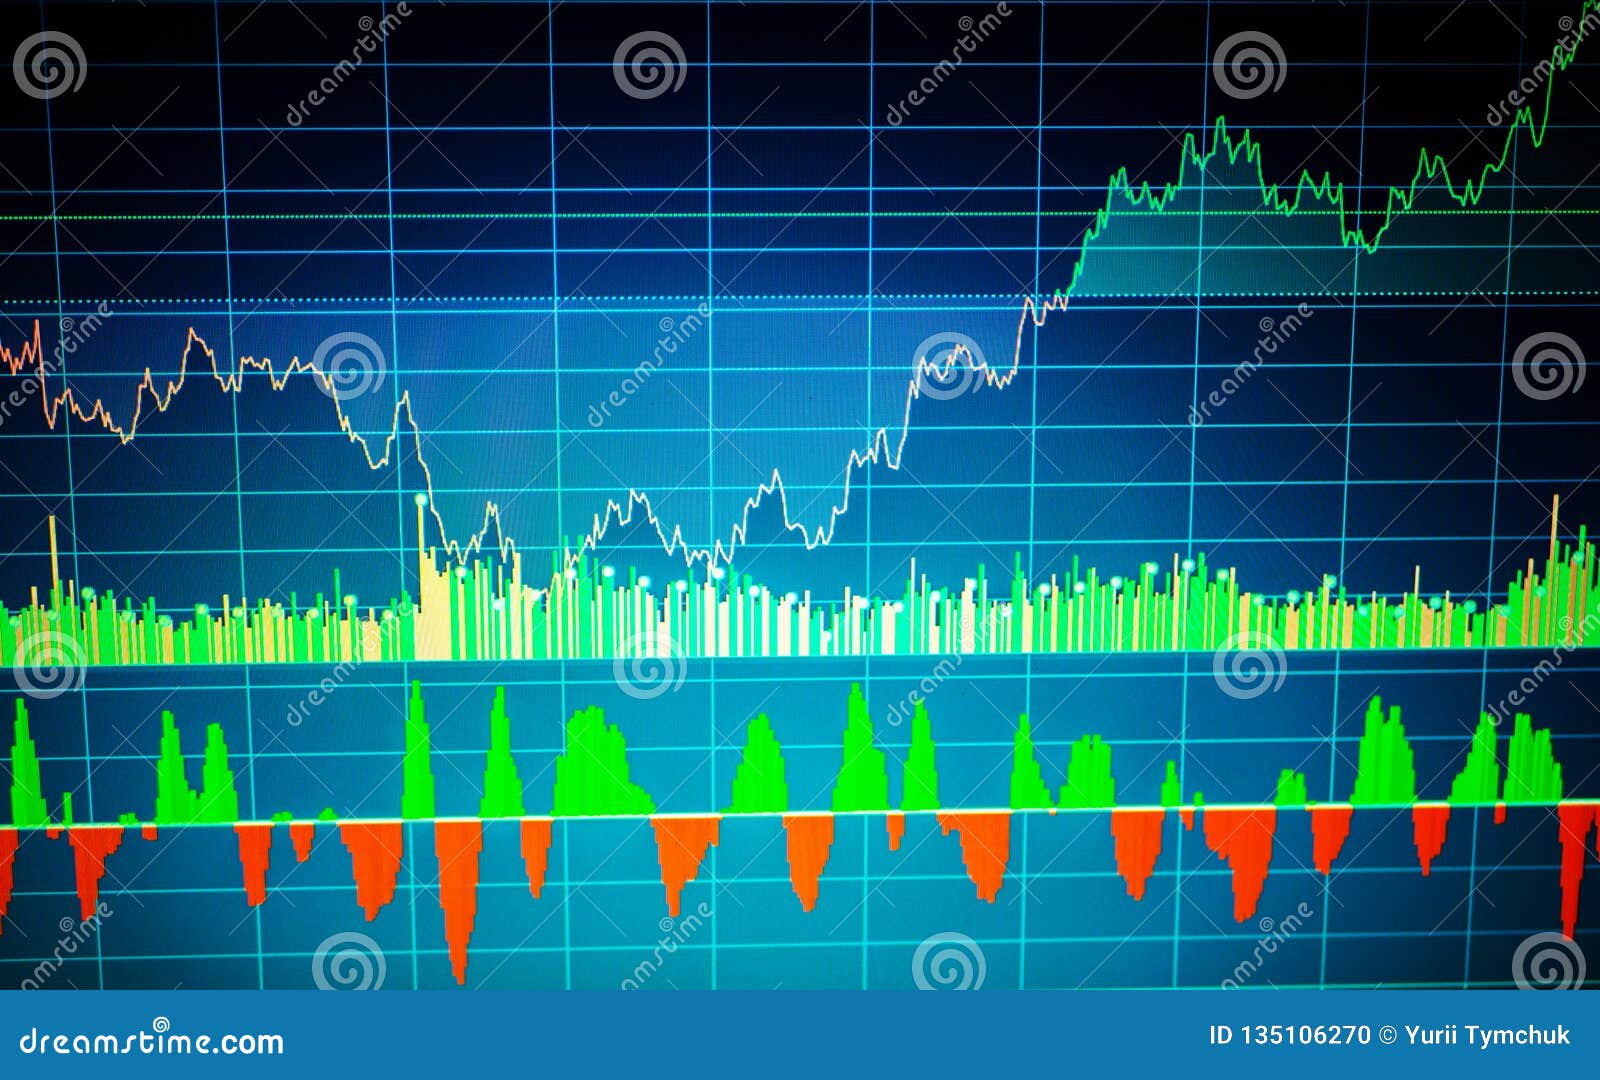 Extended Hours Trading Charts